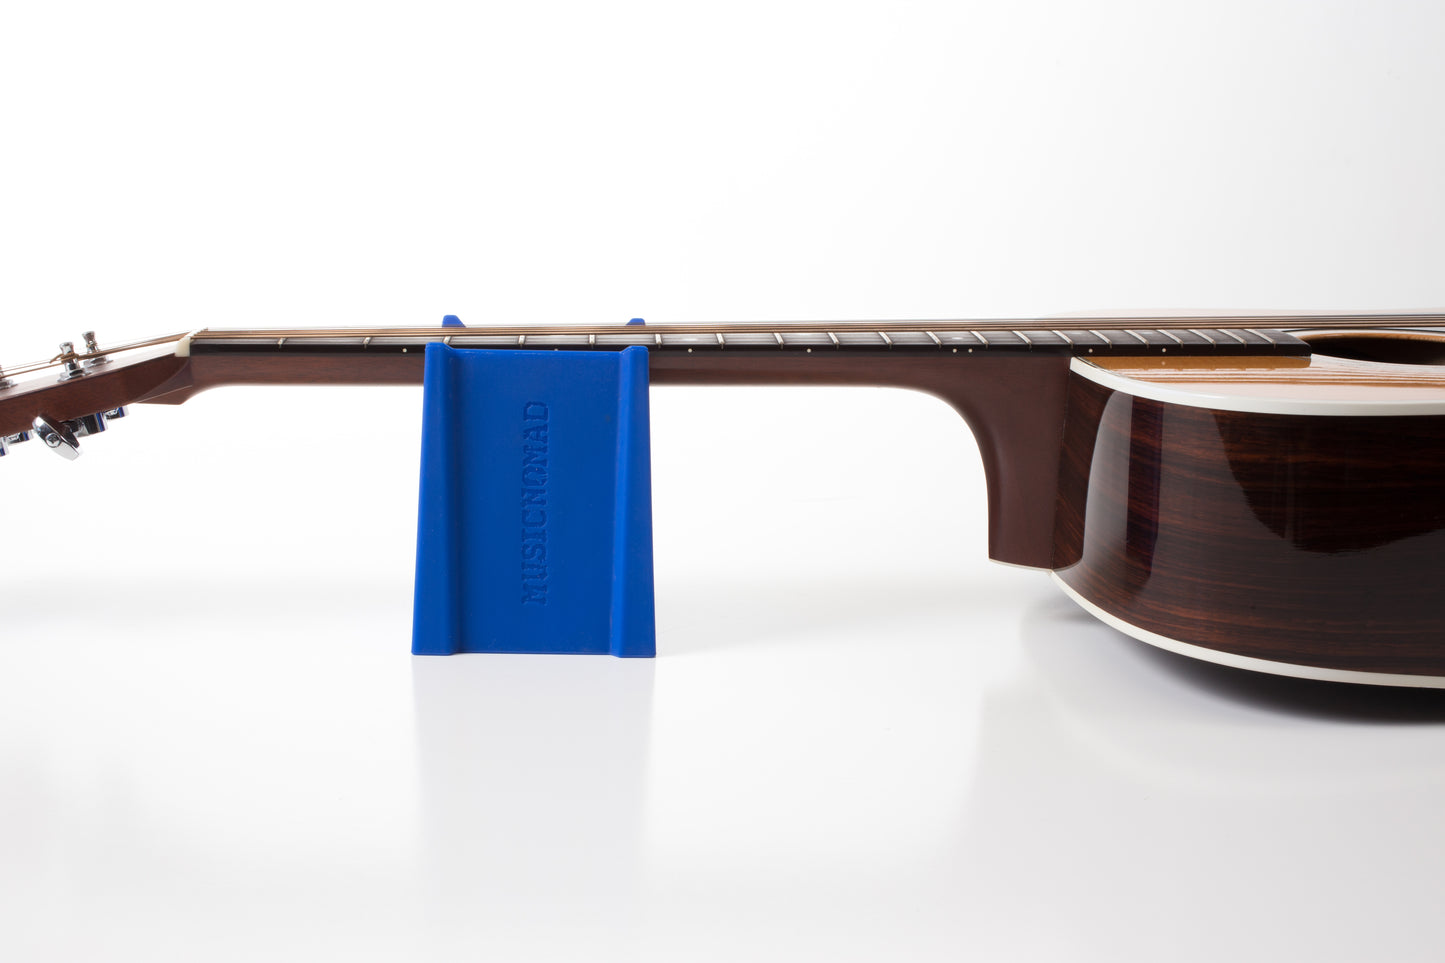 MusicNomad Cradle Cube, Guitar Neck Rest & Support for Electric, Acoustic, & Bass Guitar (MN206)